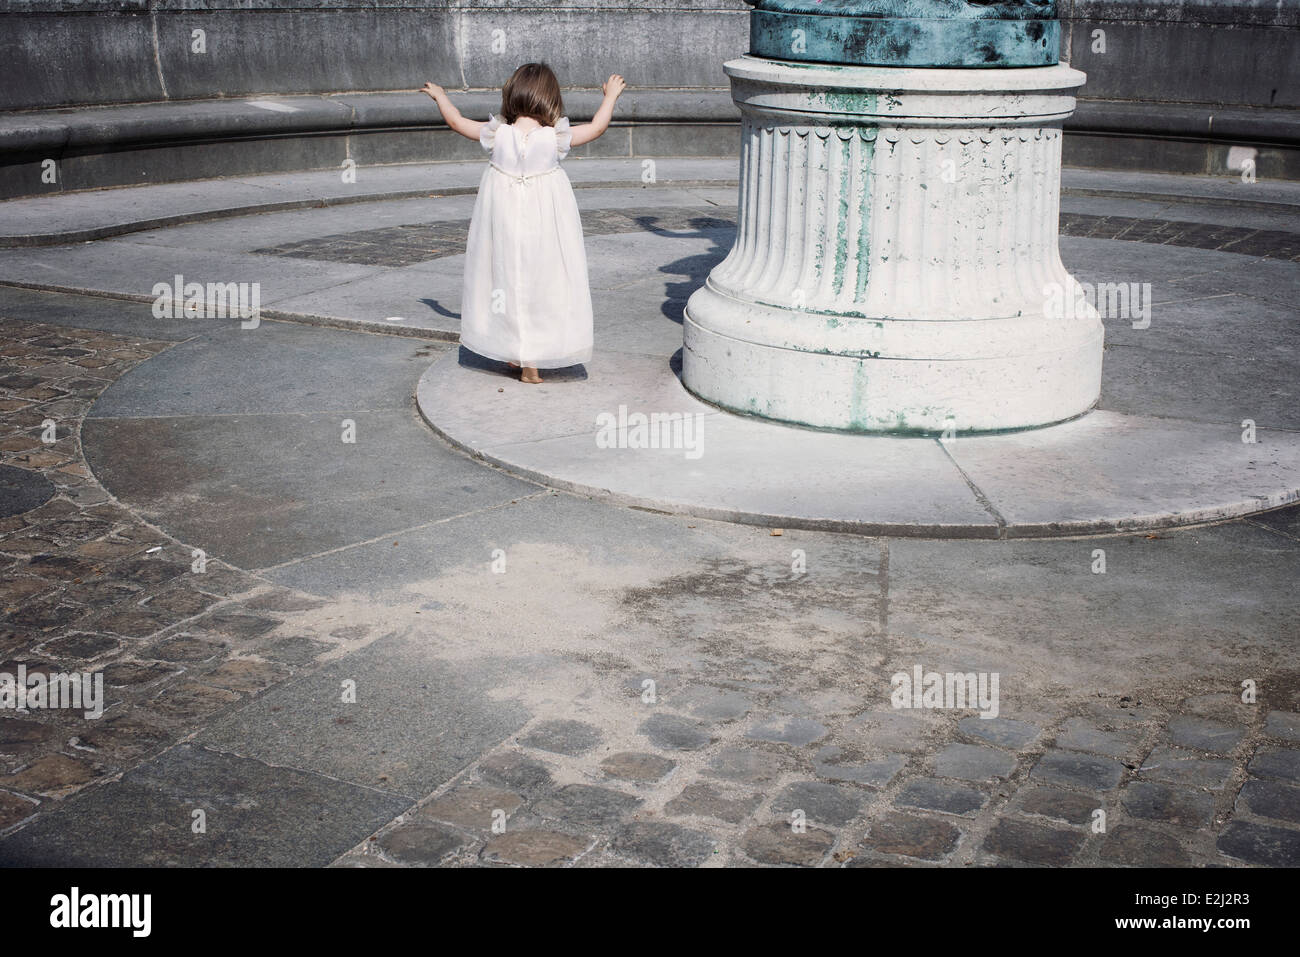 Little girl playing alone outdoors Stock Photo